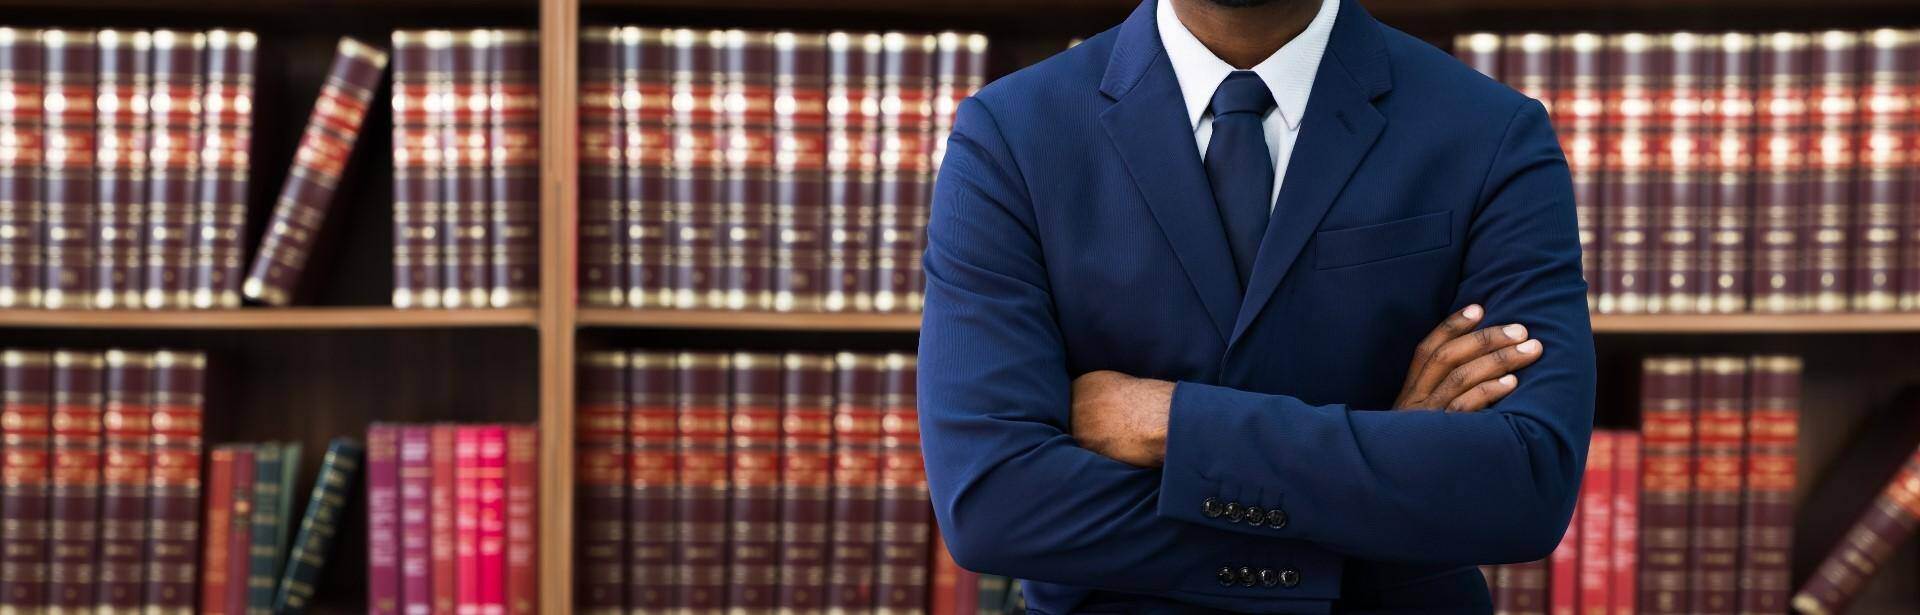 A black lawyer standing in front of a bookshelf of law book in Augusta, Georgia